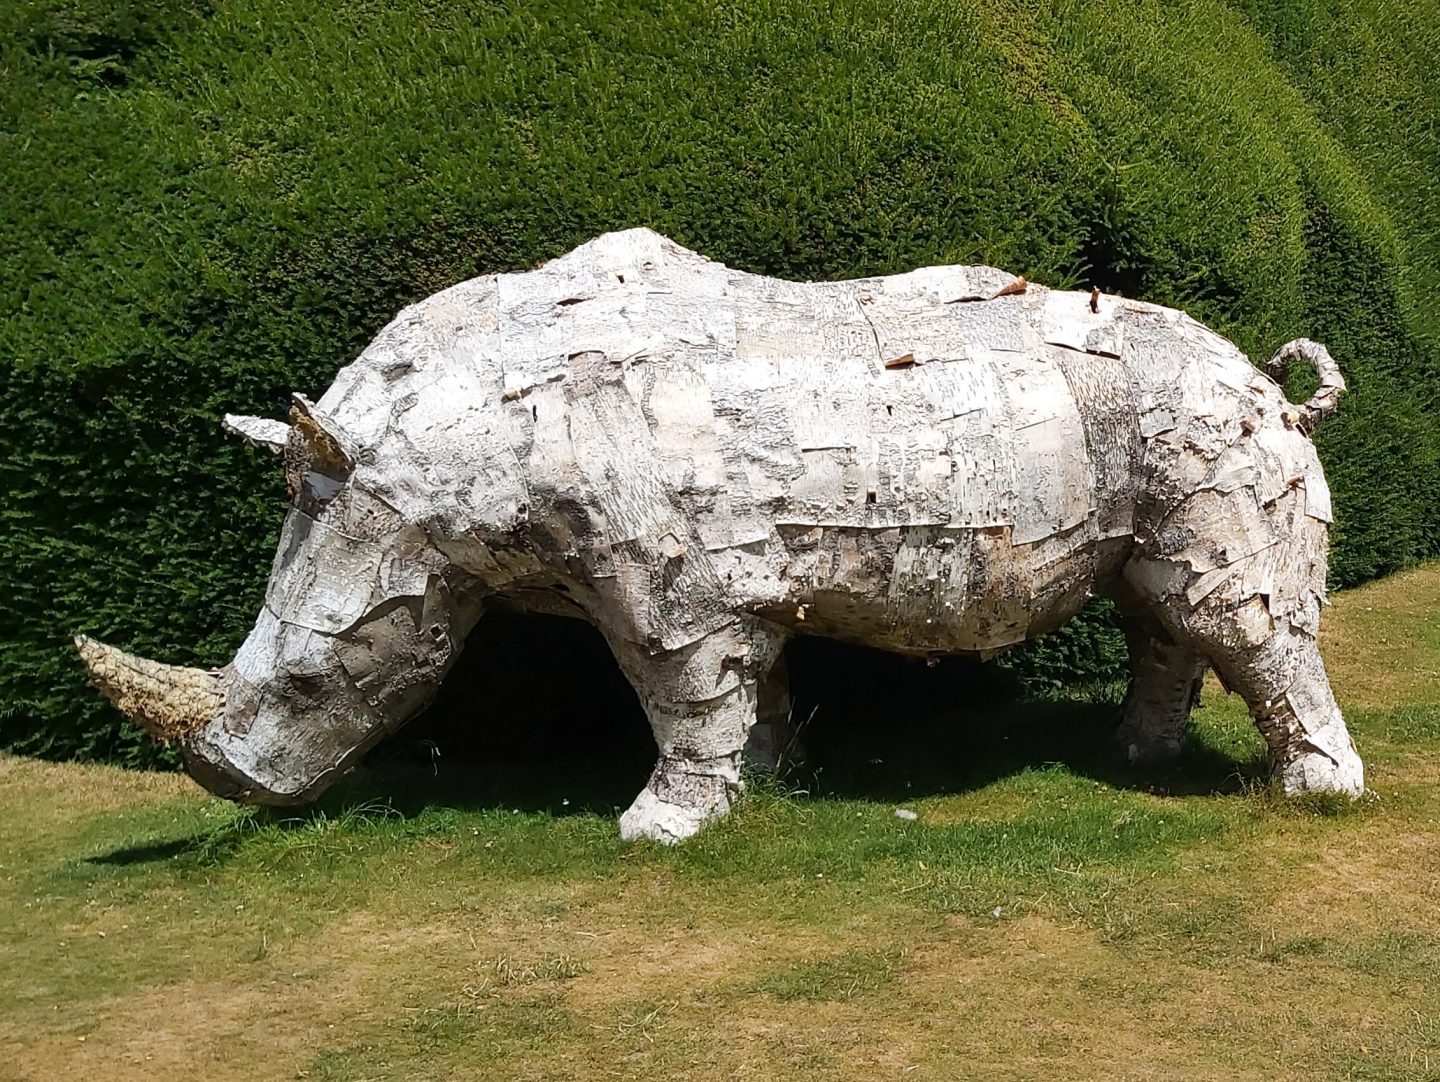 Rhino sculpture on grass next to a hedge